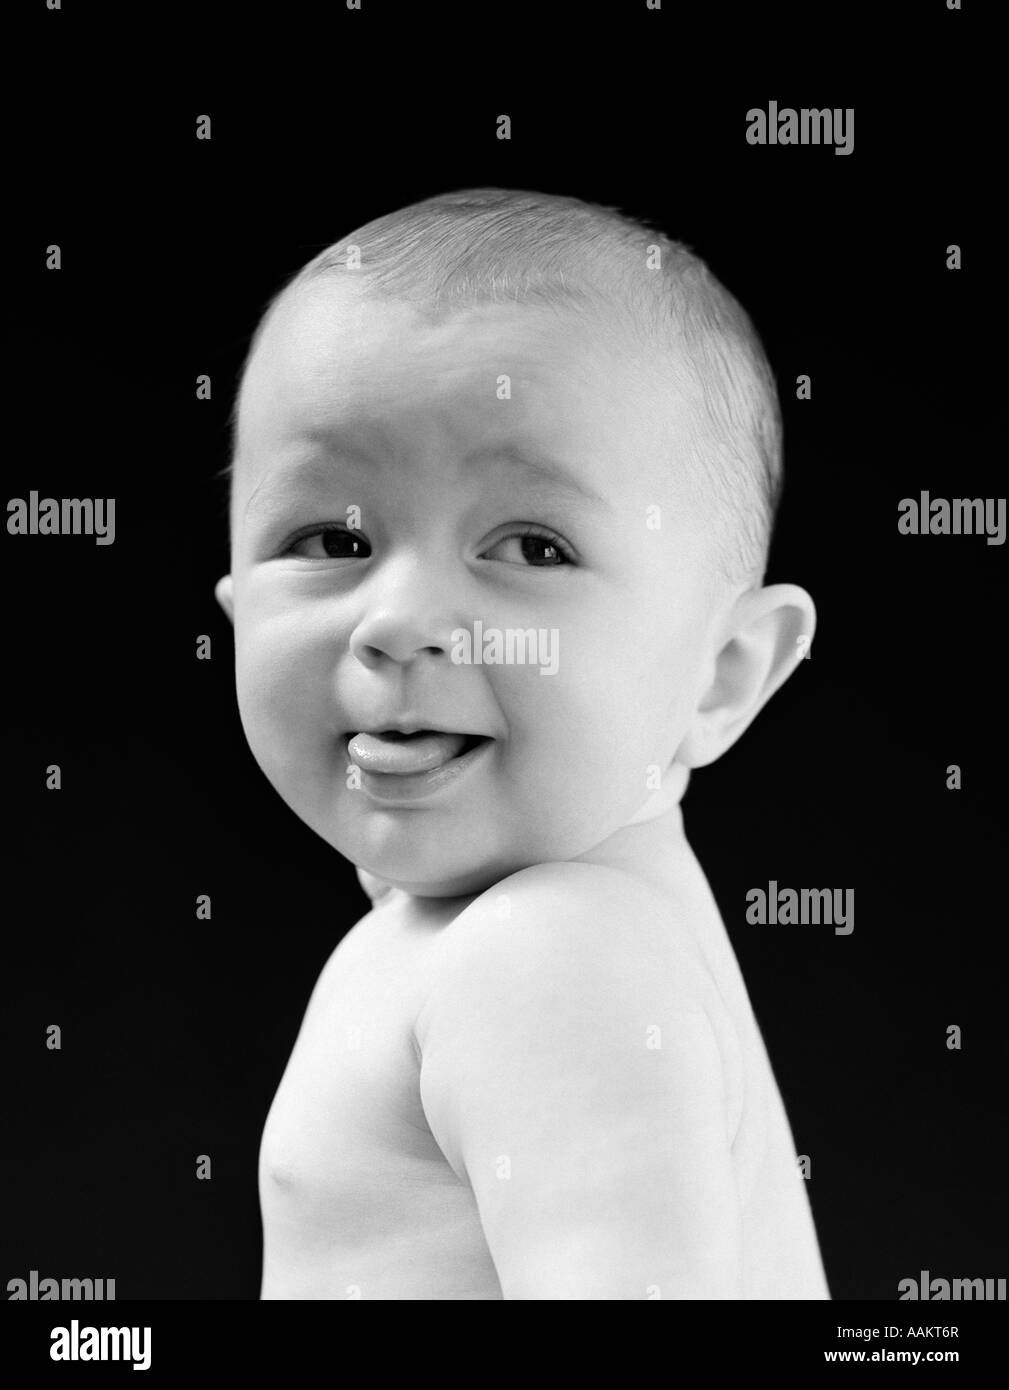 1940s 1950s BABY HEAD & SHOULDERS SMILING STICKING OUT TONGUE Stock Photo